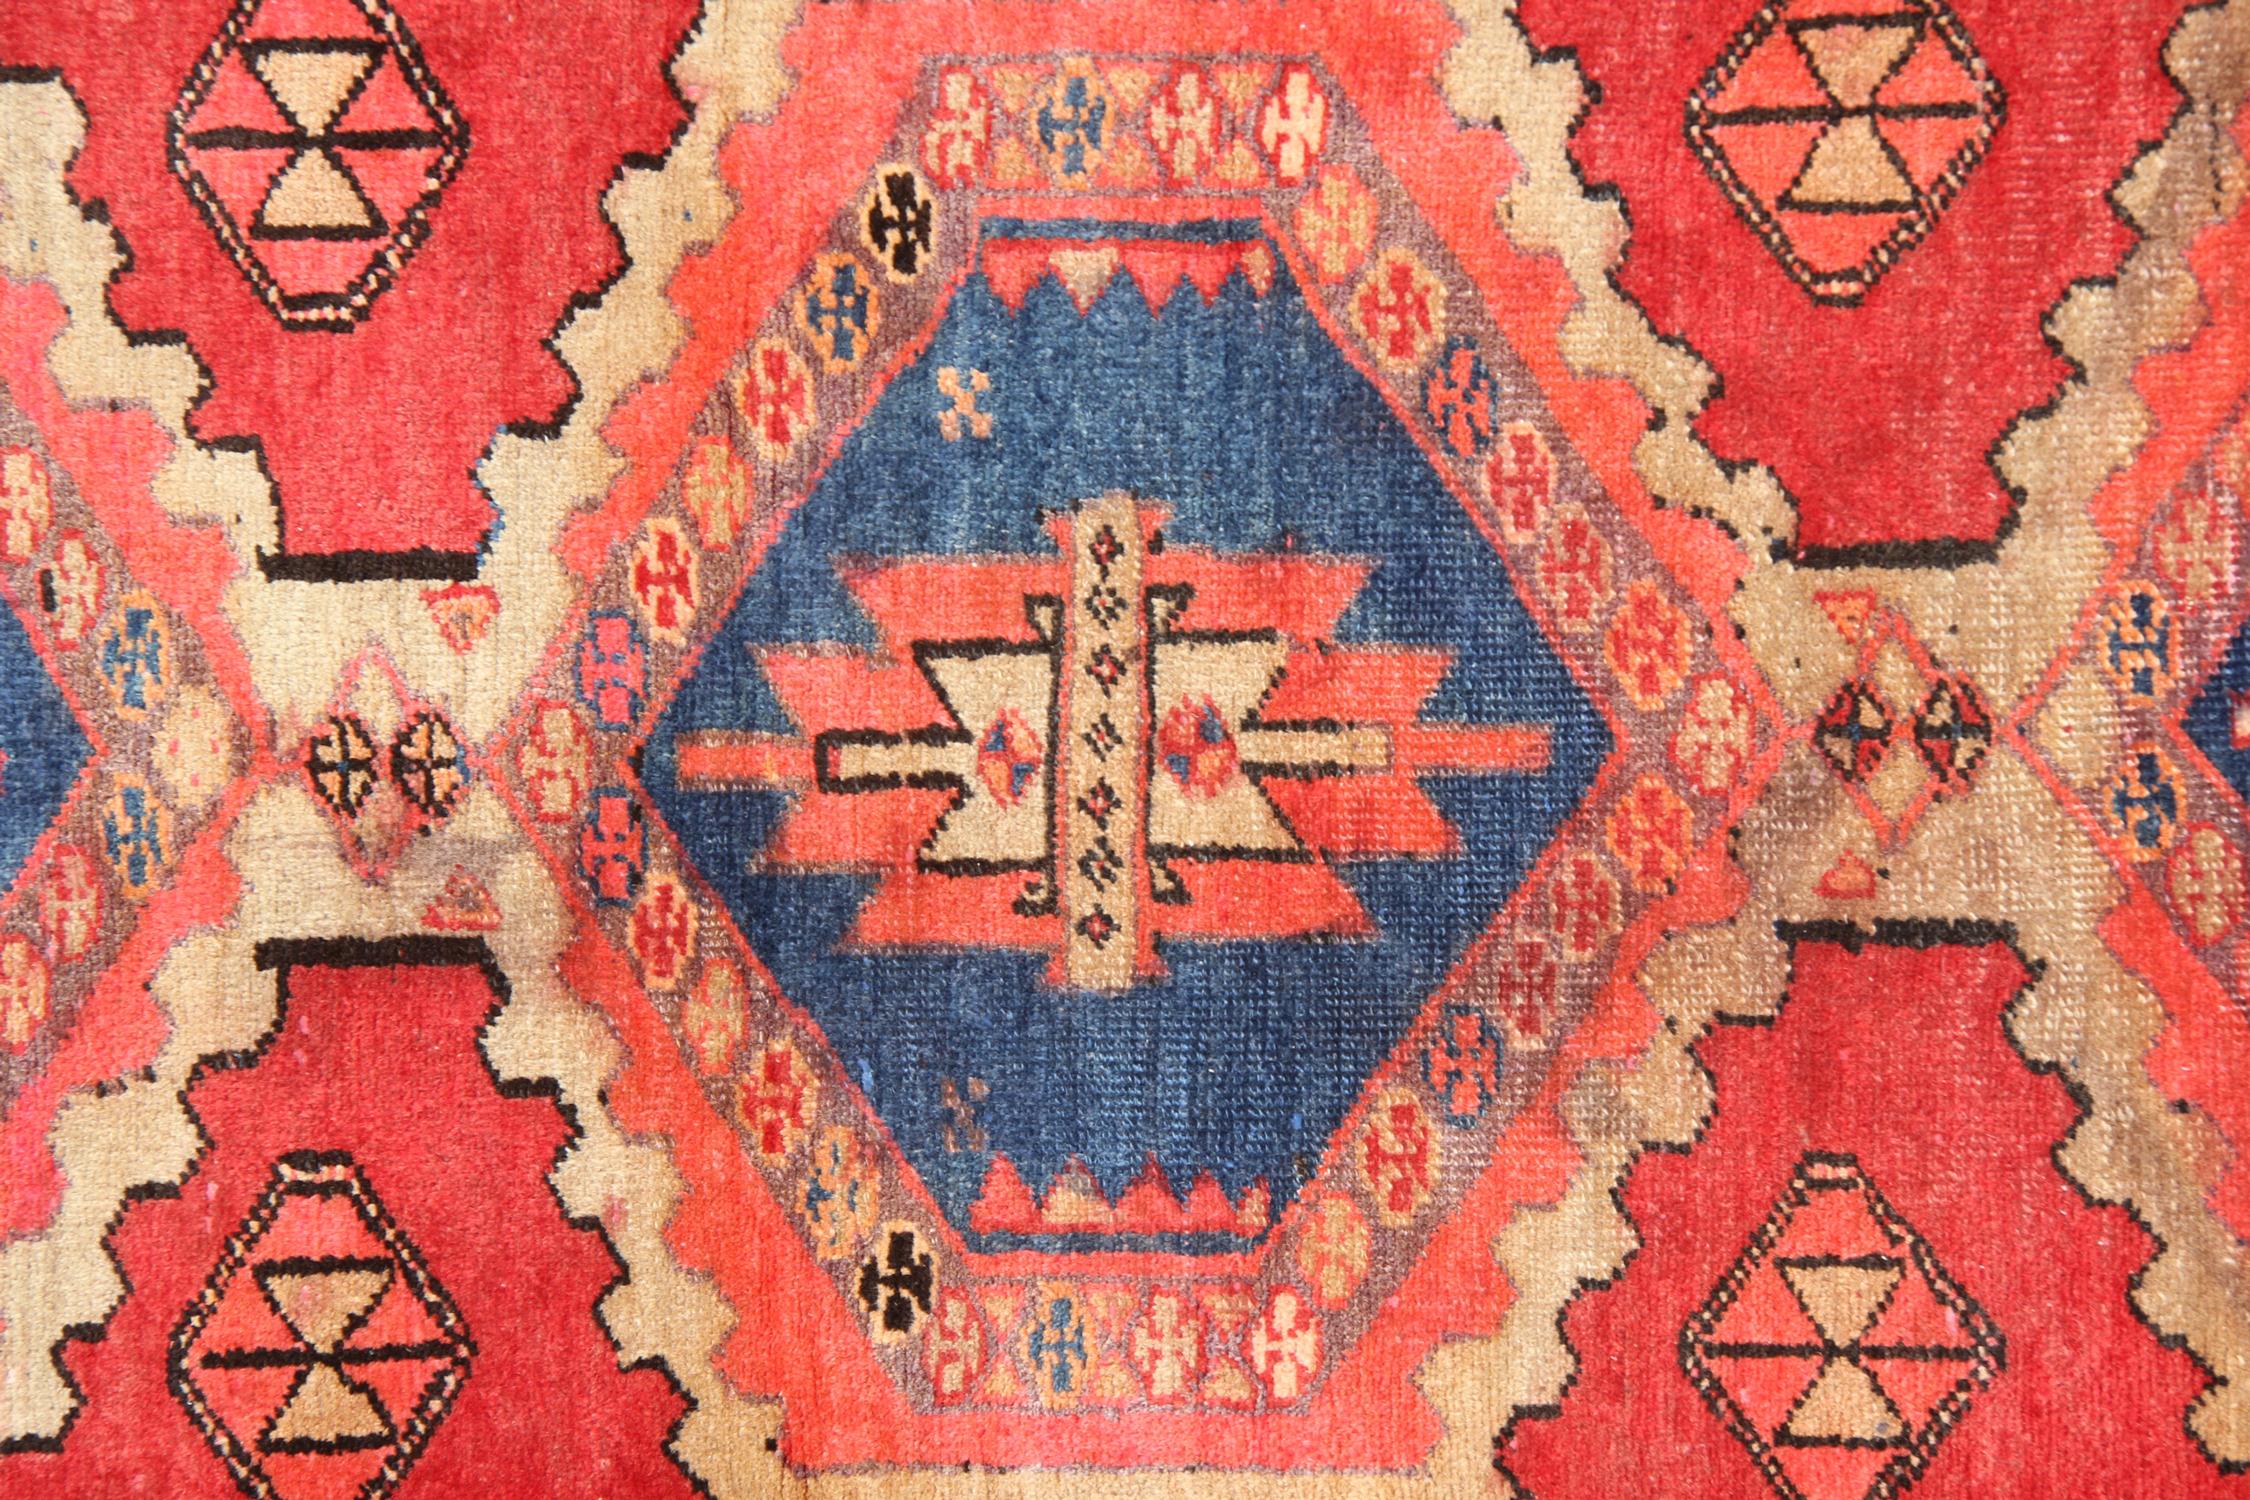 This Vintage Rug was constructed by hand with fine organic materials. Woven with a traditional design and colour palette. Featuring a rich red background and highly decorative repeat hexagon medallion design with blue and cream accents through the